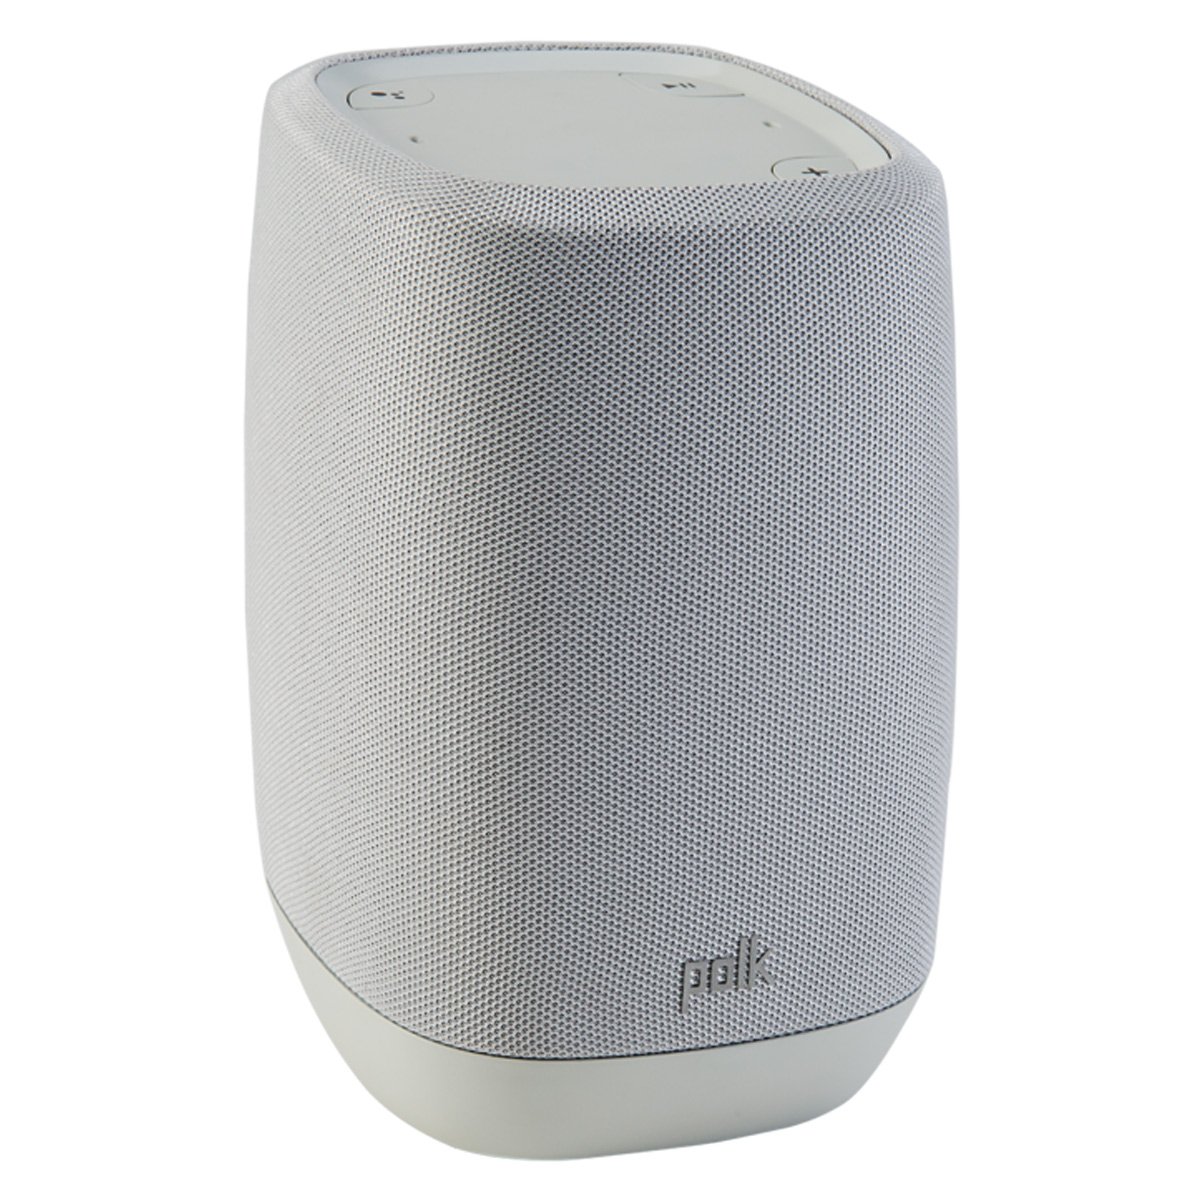 Polk Audio Assist Wireless Smart Speaker with Google Assistant (Cool Gray) - image 2 of 9